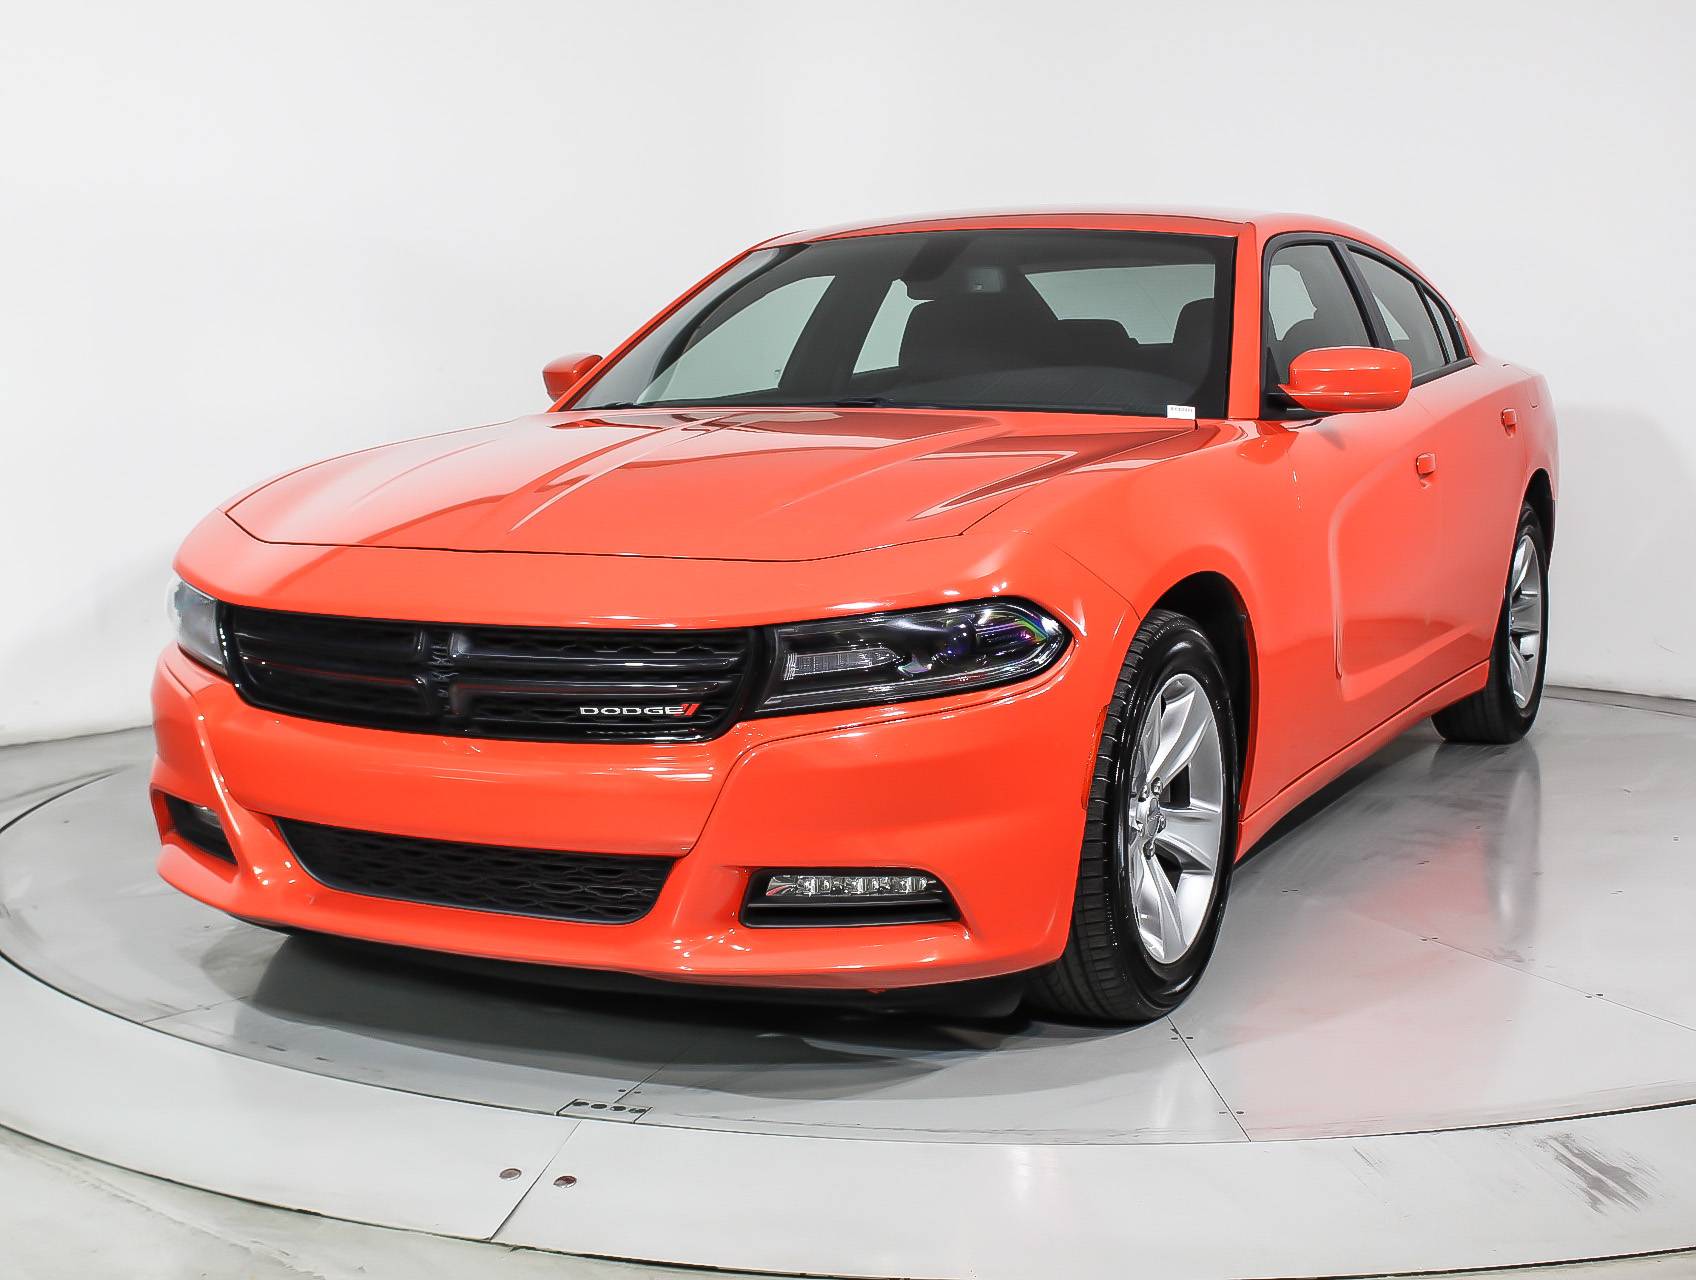 Florida Fine Cars - Used DODGE CHARGER 2017 HOLLYWOOD SXT